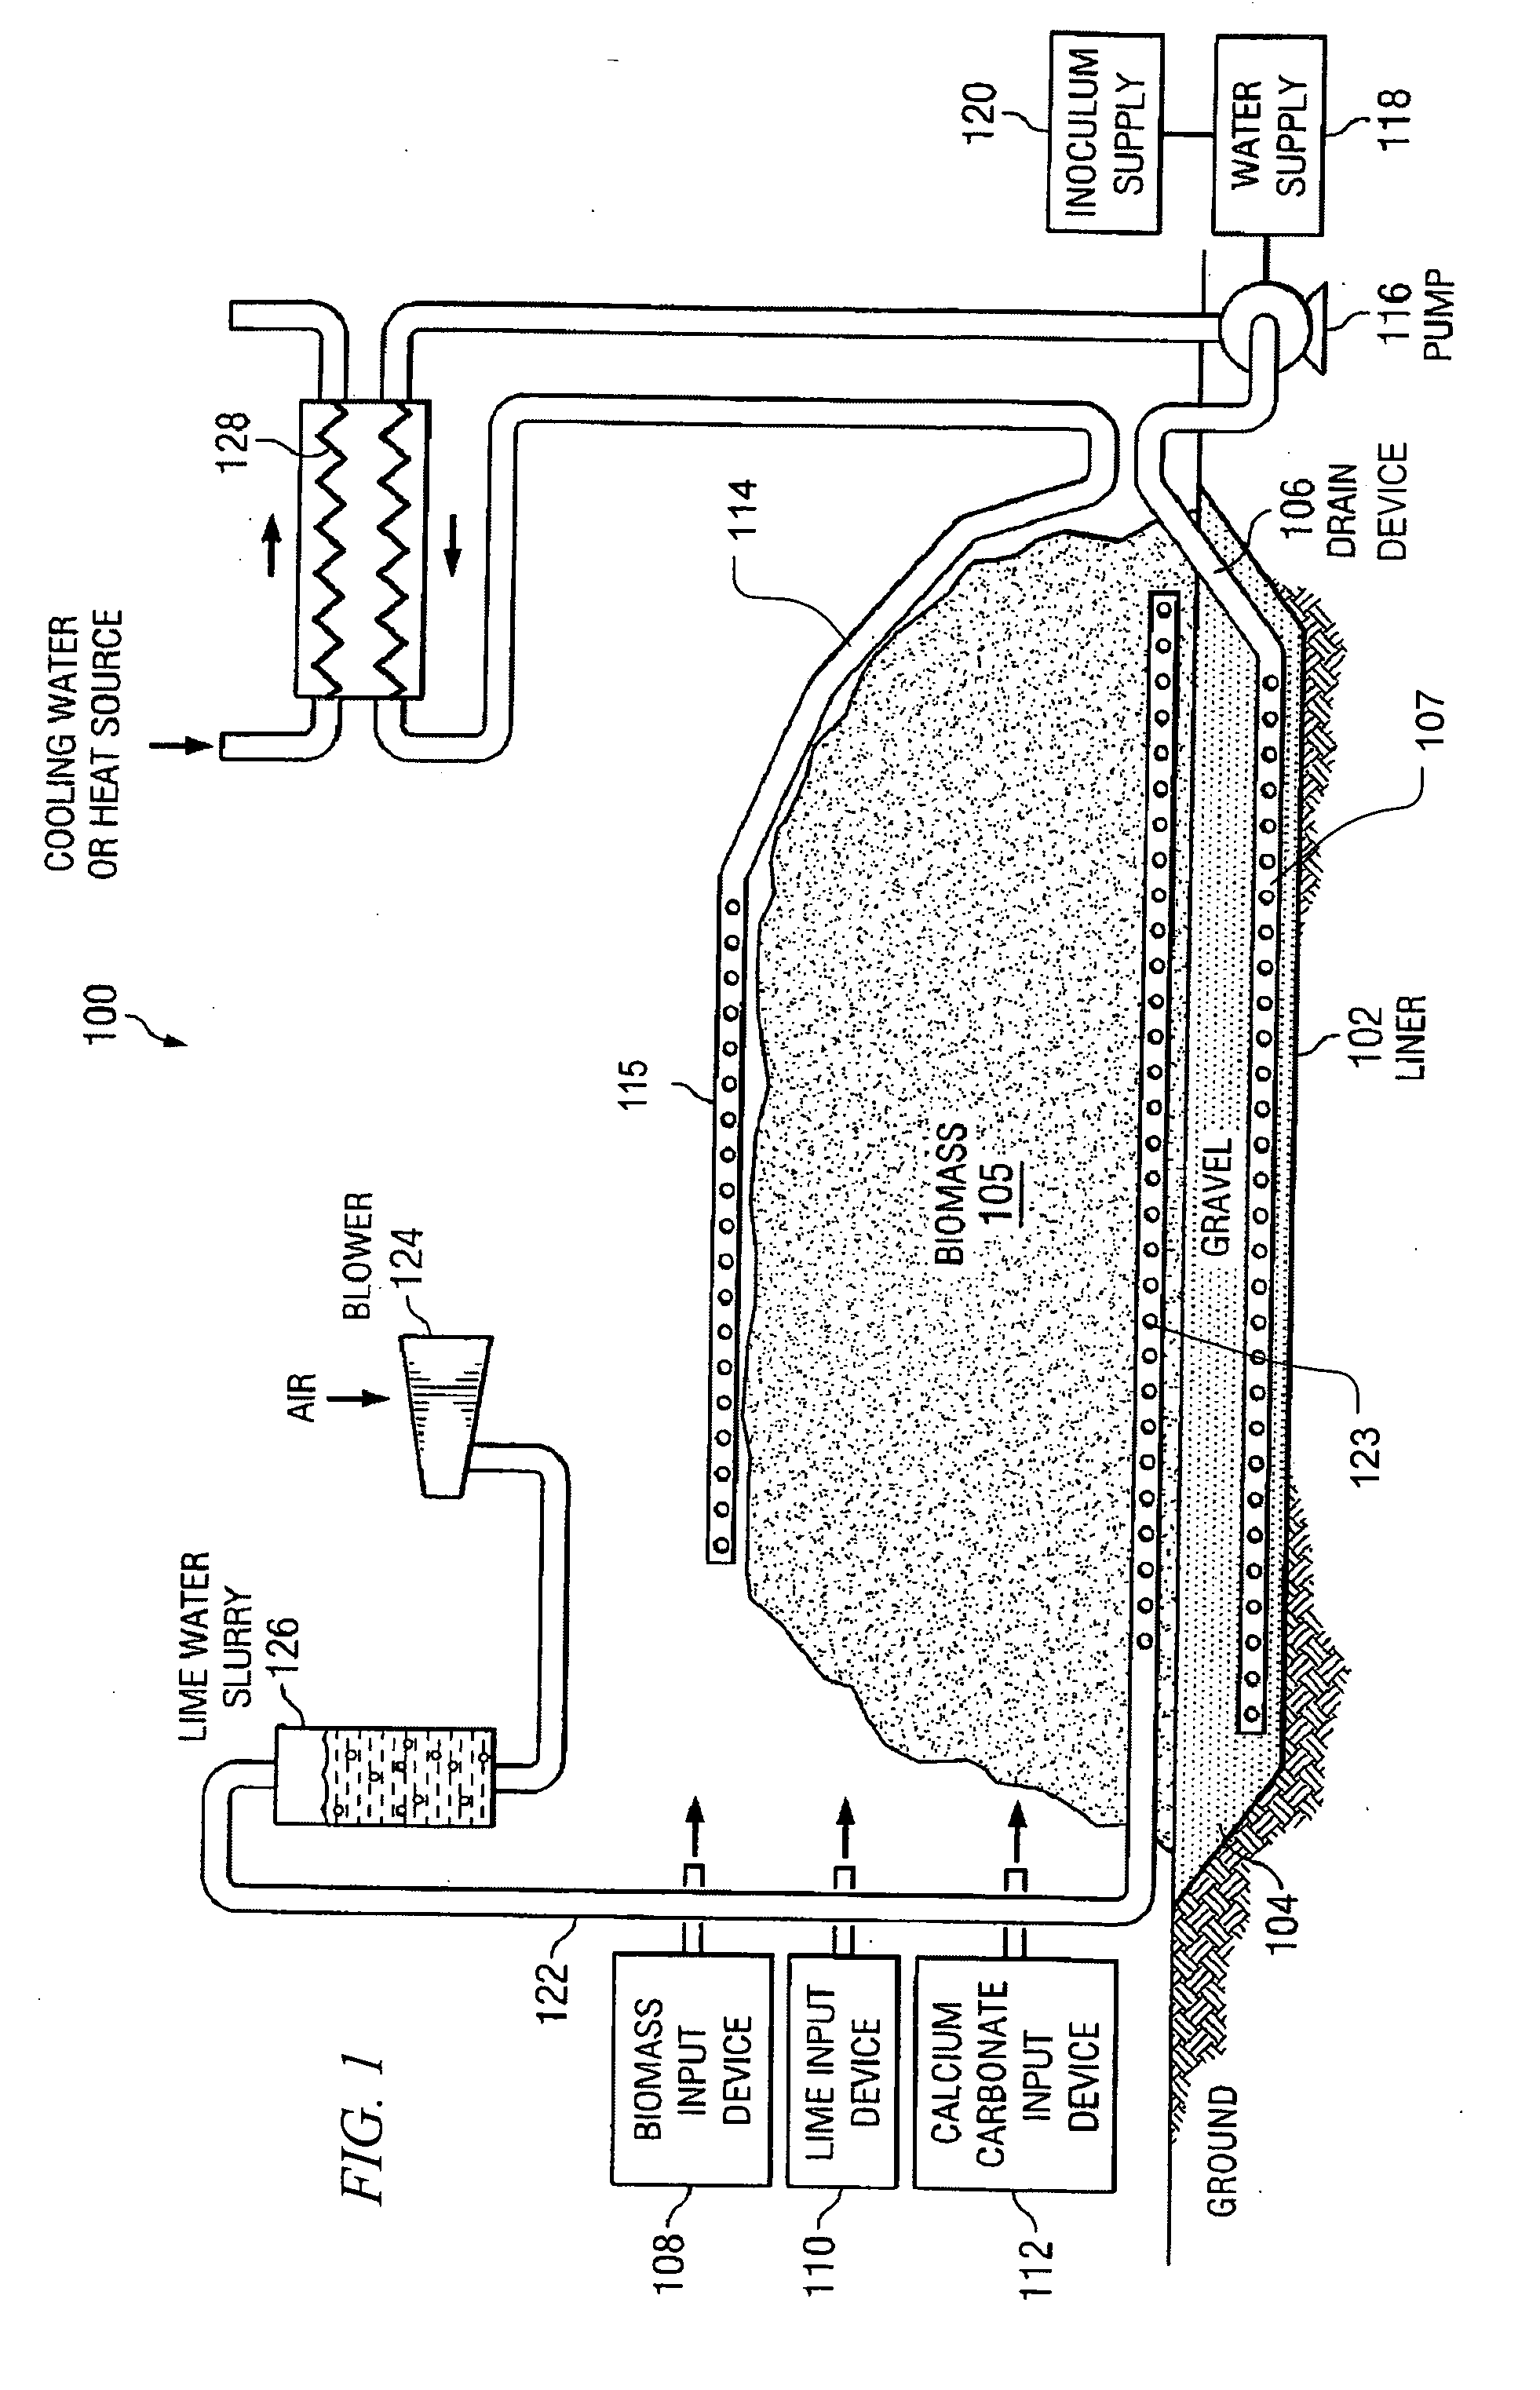 System and method for processing biomass